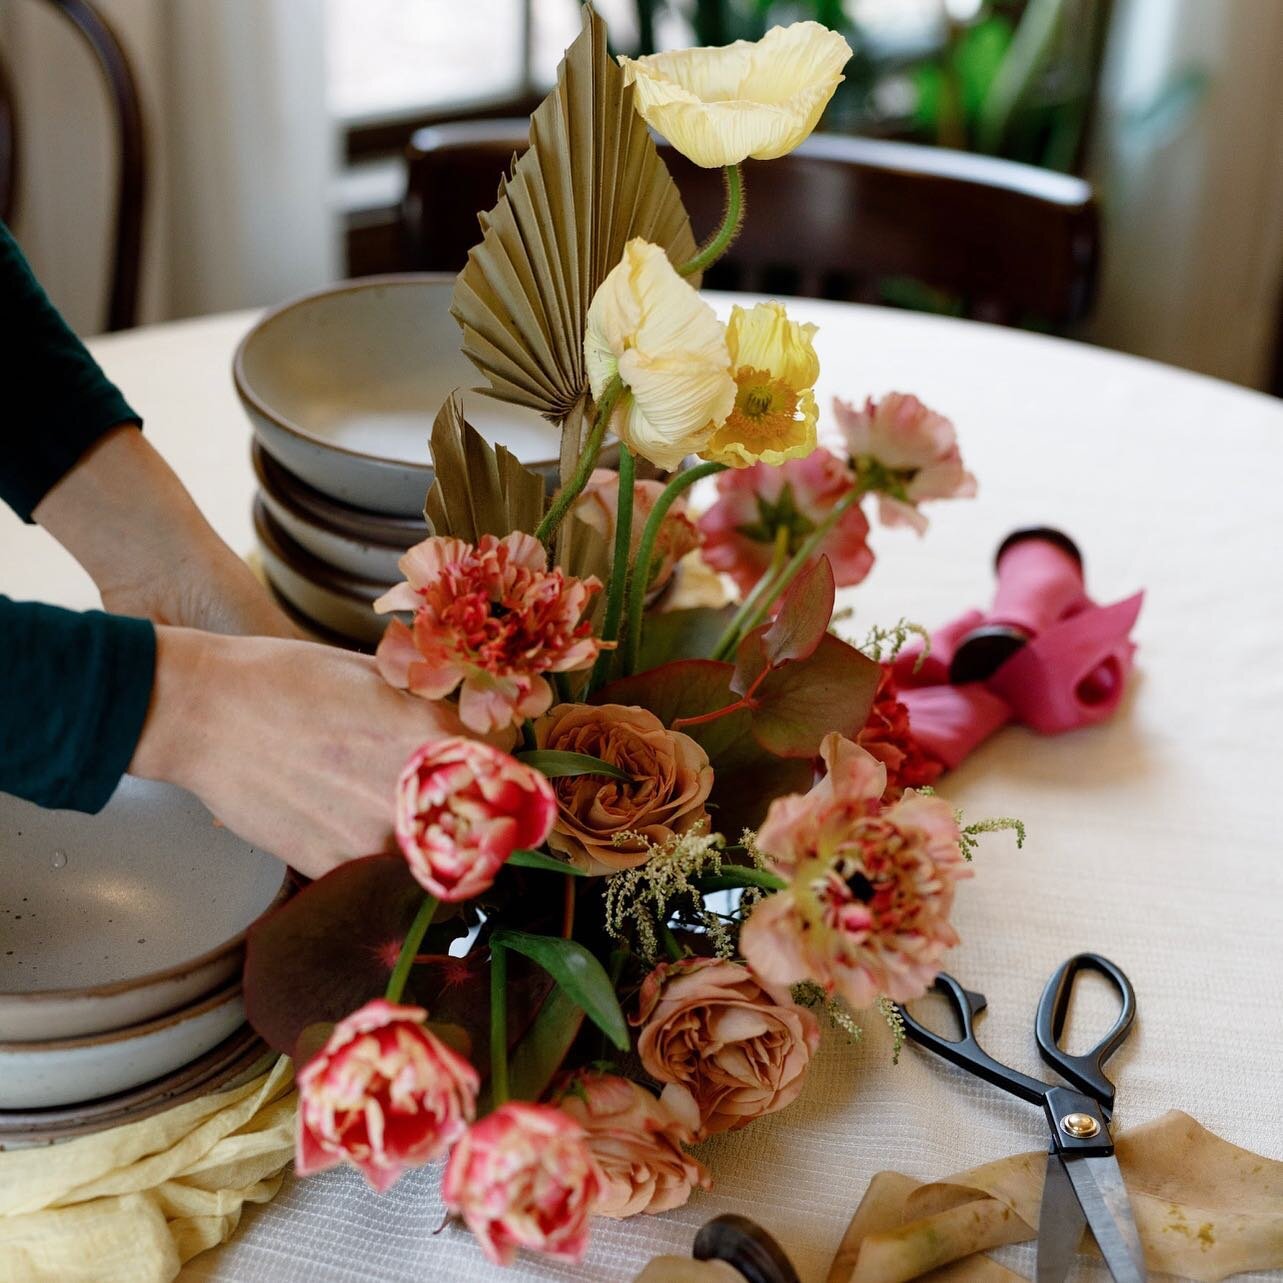 Thrilled to be offering a virtual floral class along with @eastforkatlanta! Bespoke flowers, exquisite pottery and dessert all on a Sunday 🌿

Join us on March 14th from 3-4 pm for a 1 hour floral design class via Zoom. Tickets include all florals an